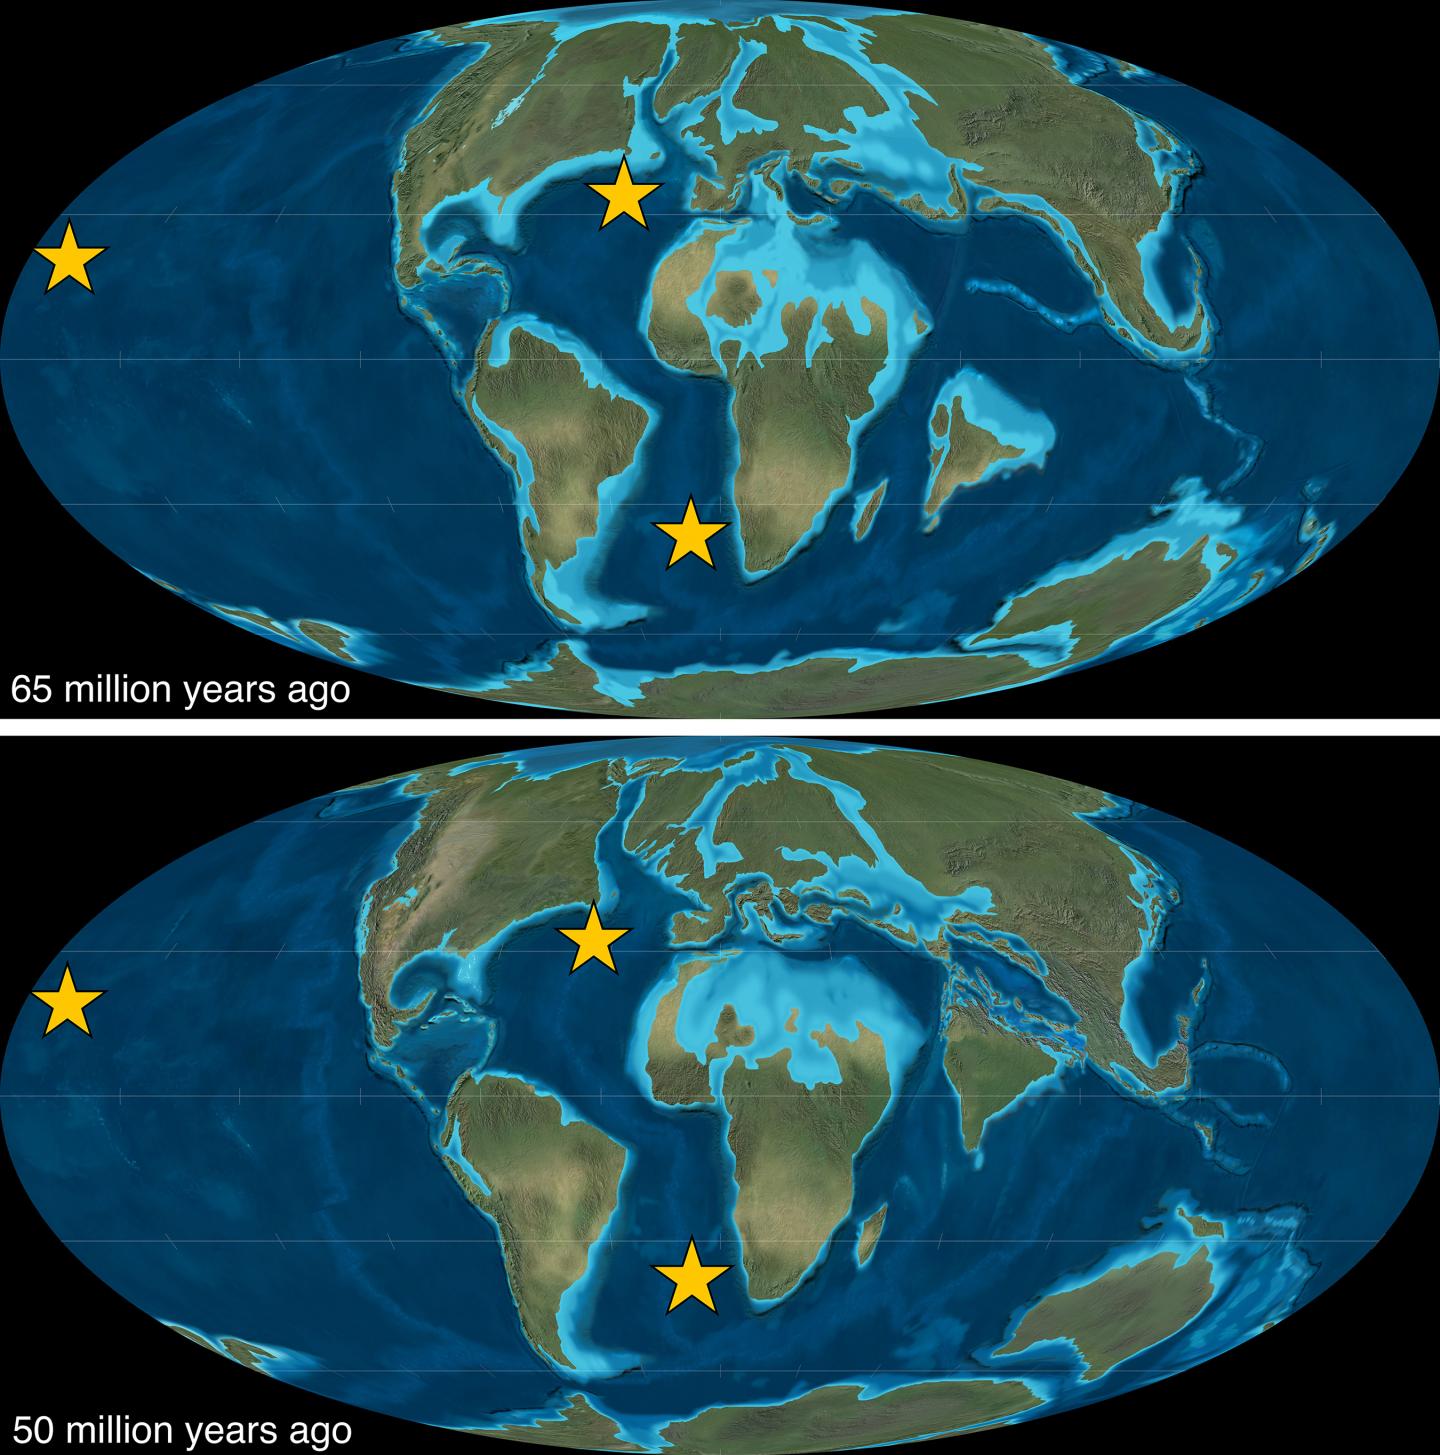 Planetary Changes from 65 to 50 Mya Responsible for Changes to Ocean Oxygen Levels